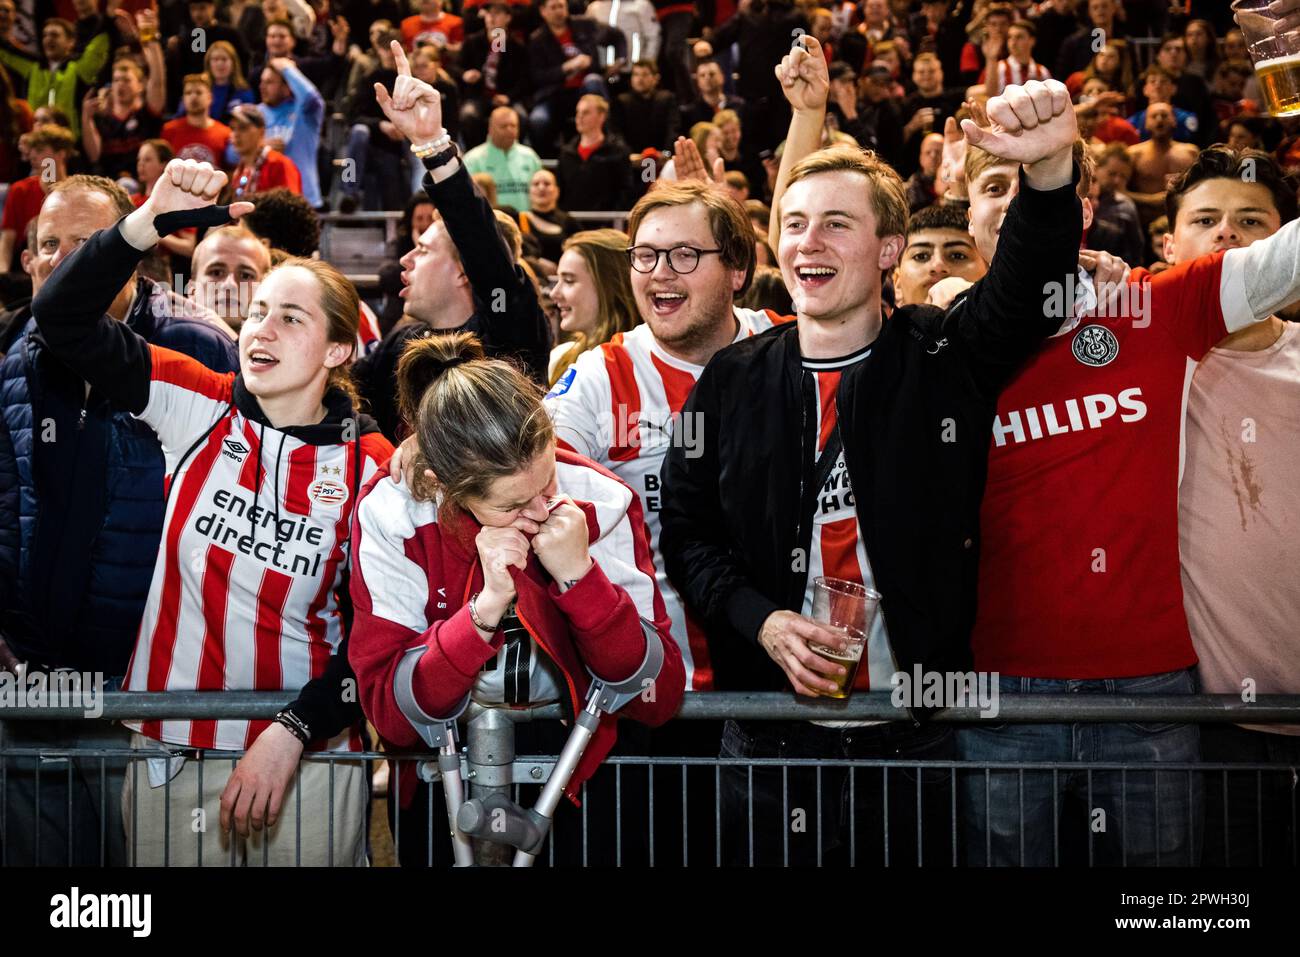 EINDHOVEN - Fans in the Philips Stadium during the celebration of PSV. The football club from Eindhoven has the KNVB Cup back in its hands thanks to a victory over Ajax. The team of coach Ruud van Nistelrooij defeated Ajax in the final in De Kuip on penalties. ANP ROB ENGELAAR netherlands out - belgium out Stock Photo